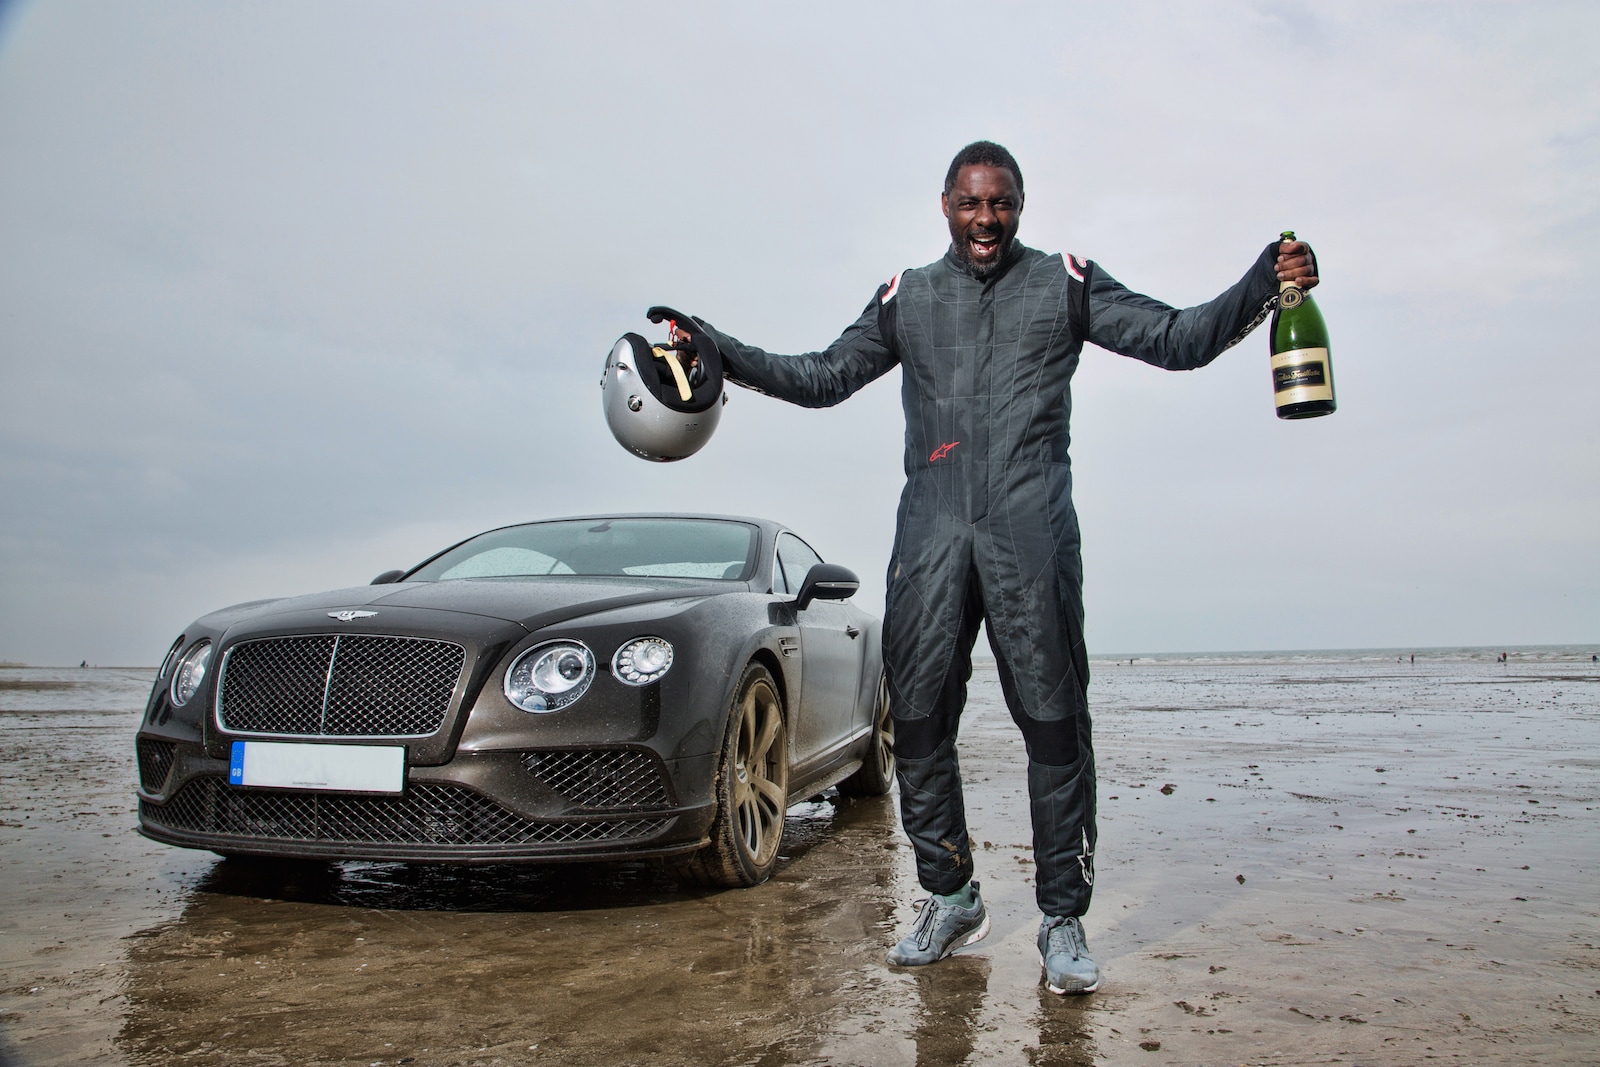 idris-elba-sets-new-flying-mile-uk-land-speed-record-in-bentley-continental-gt_100509957_h.jpg